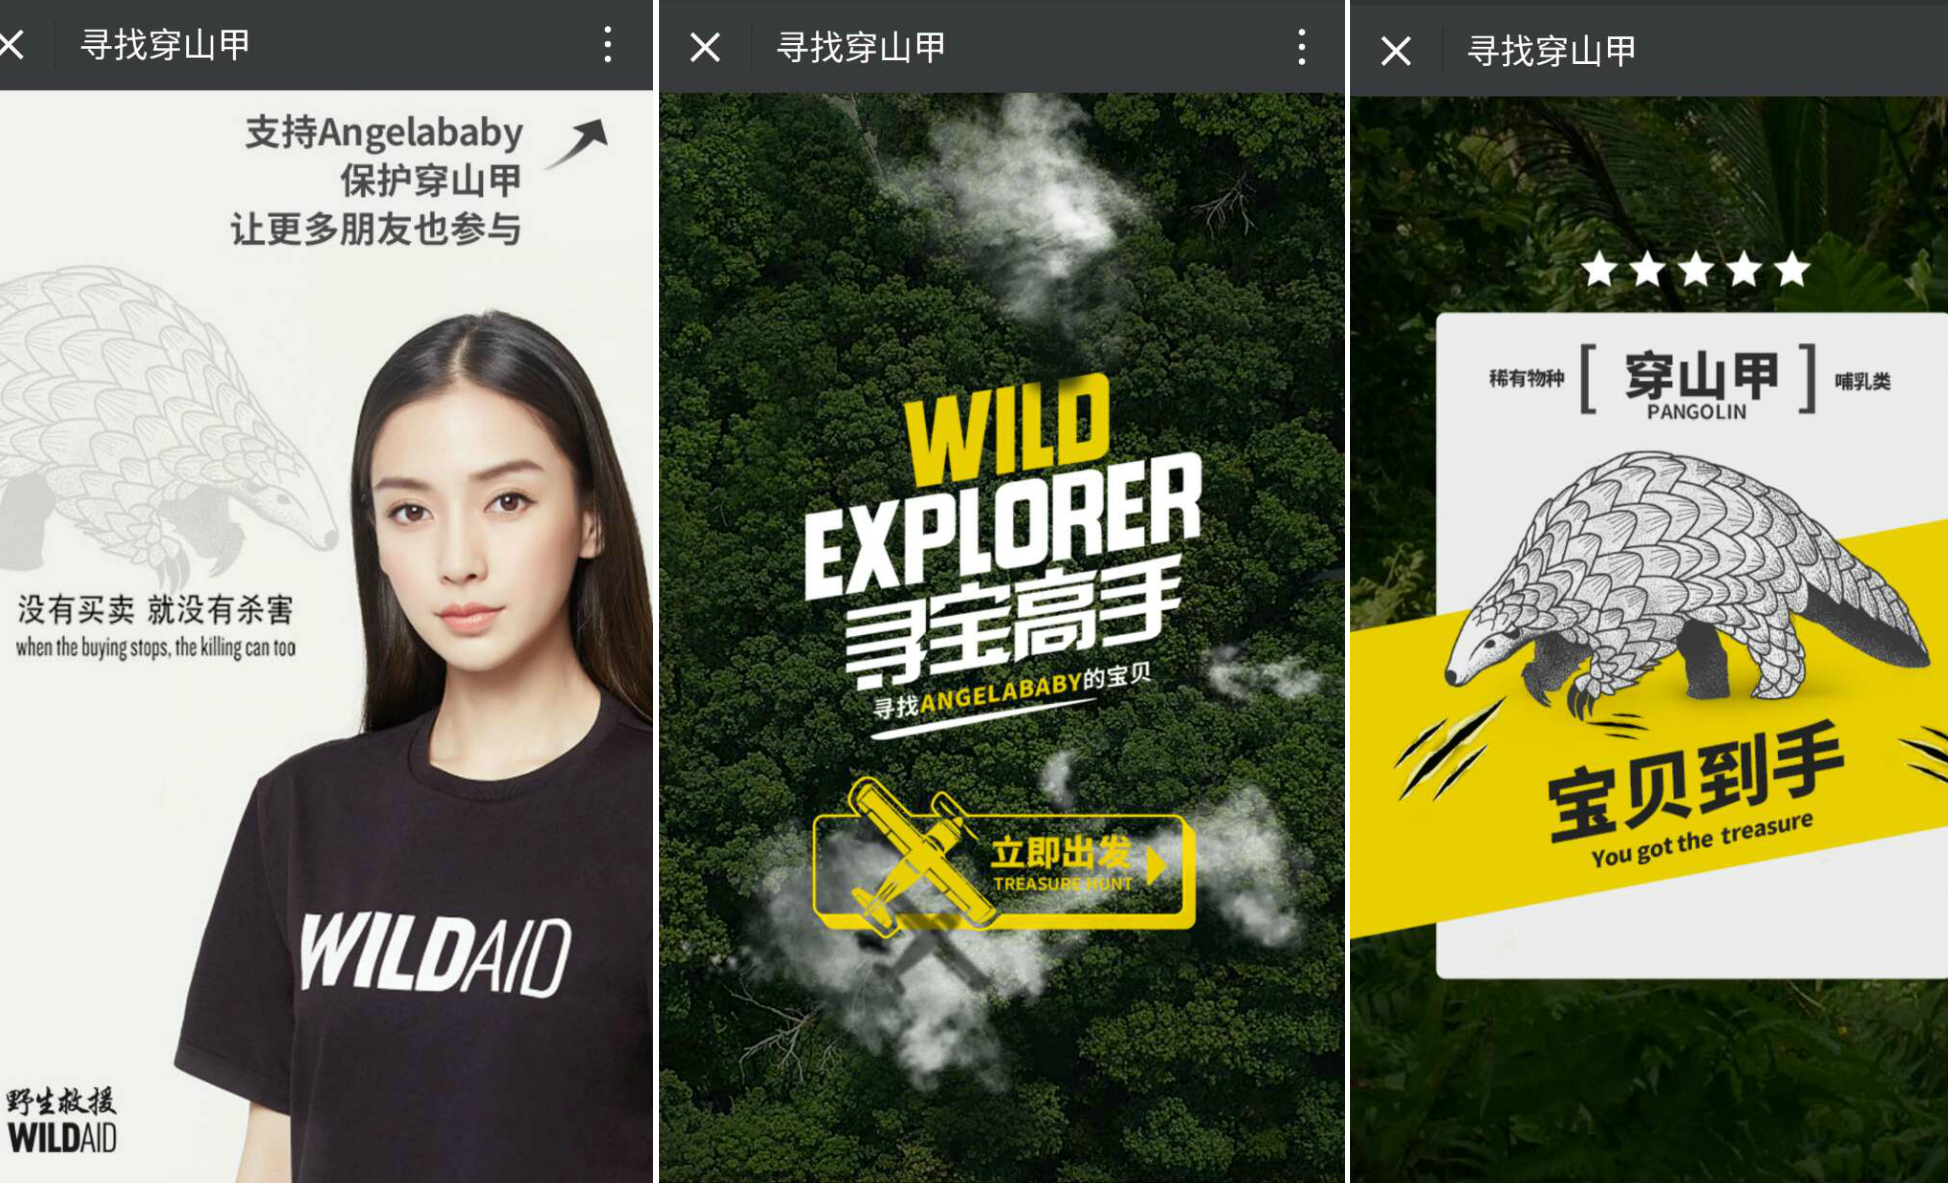 Screenshots from Wunderman's WeChat game, Wild Explorer, which features Angelababy and is designed to raise awareness about the endangered pangolins.